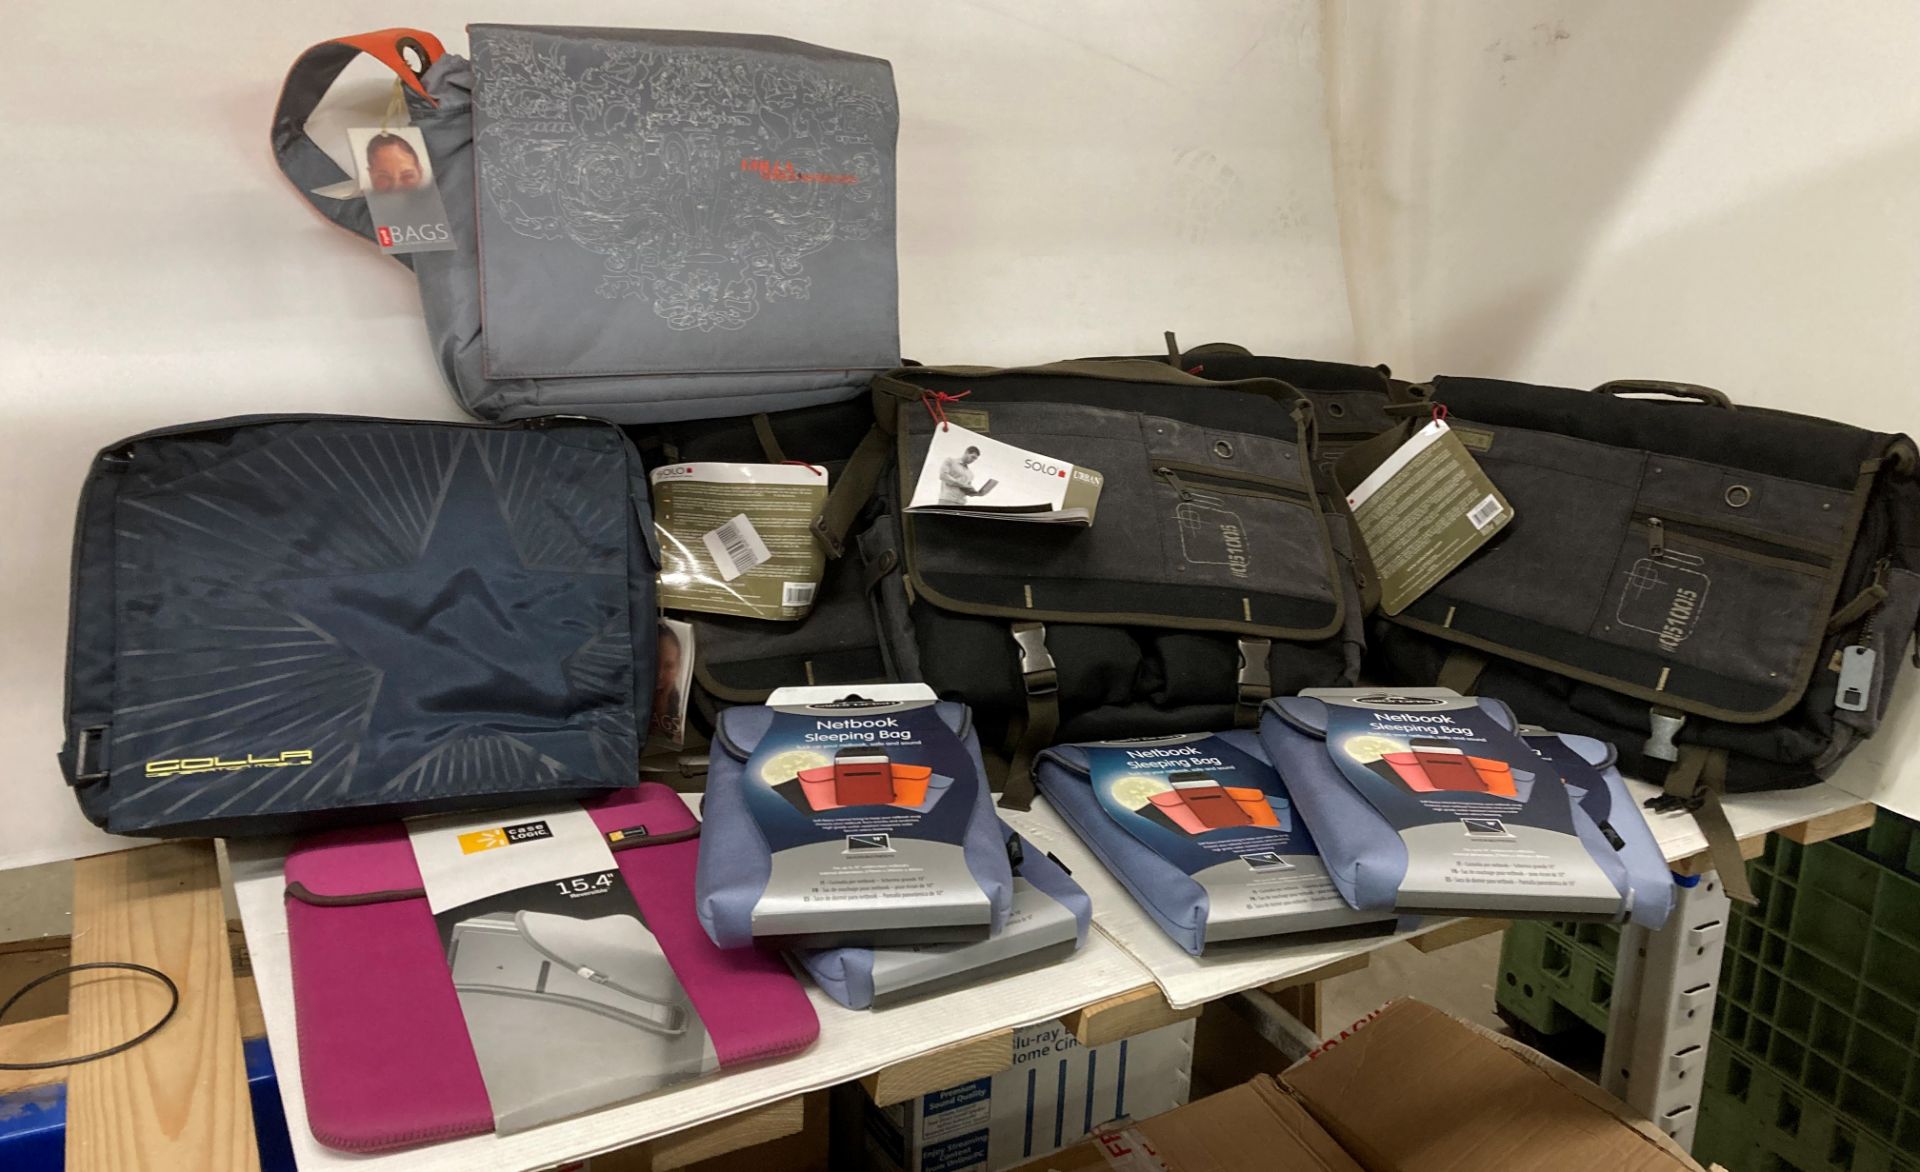 12 x assorted laptop bags and netbook sleeping bags by Colla,